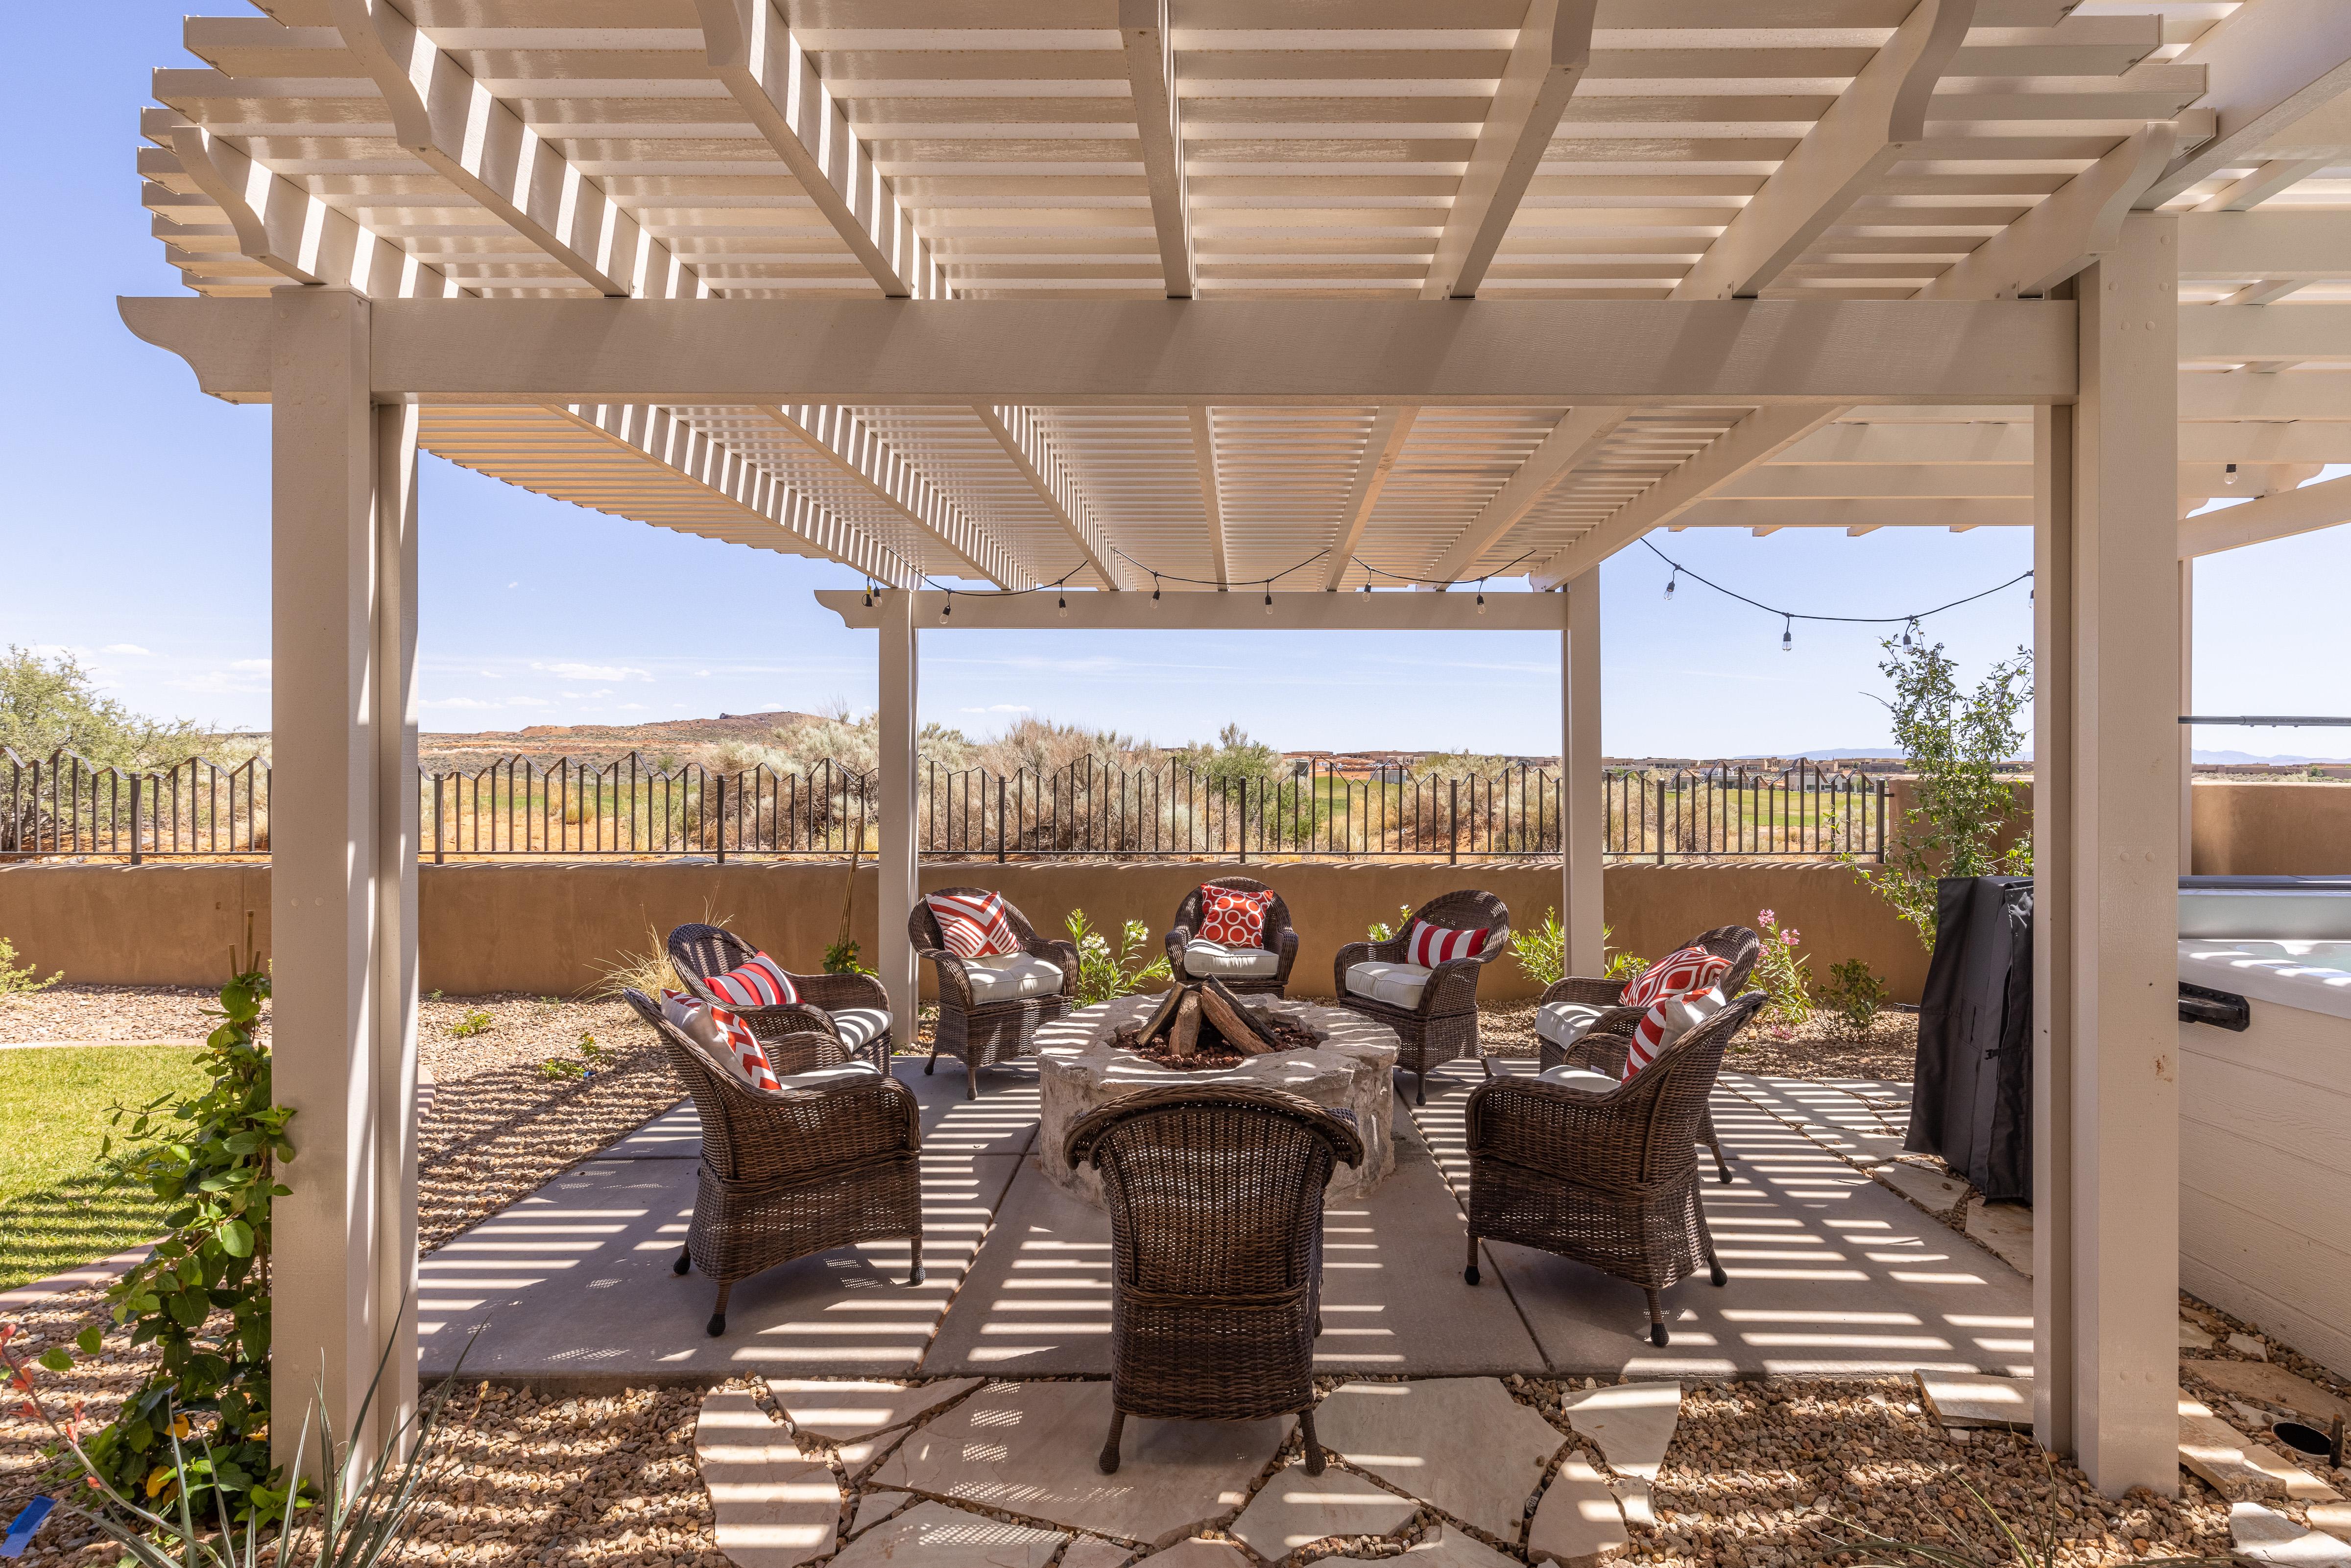 Enjoy the weather under the pergola while sitting in our comfortable patio furniture.